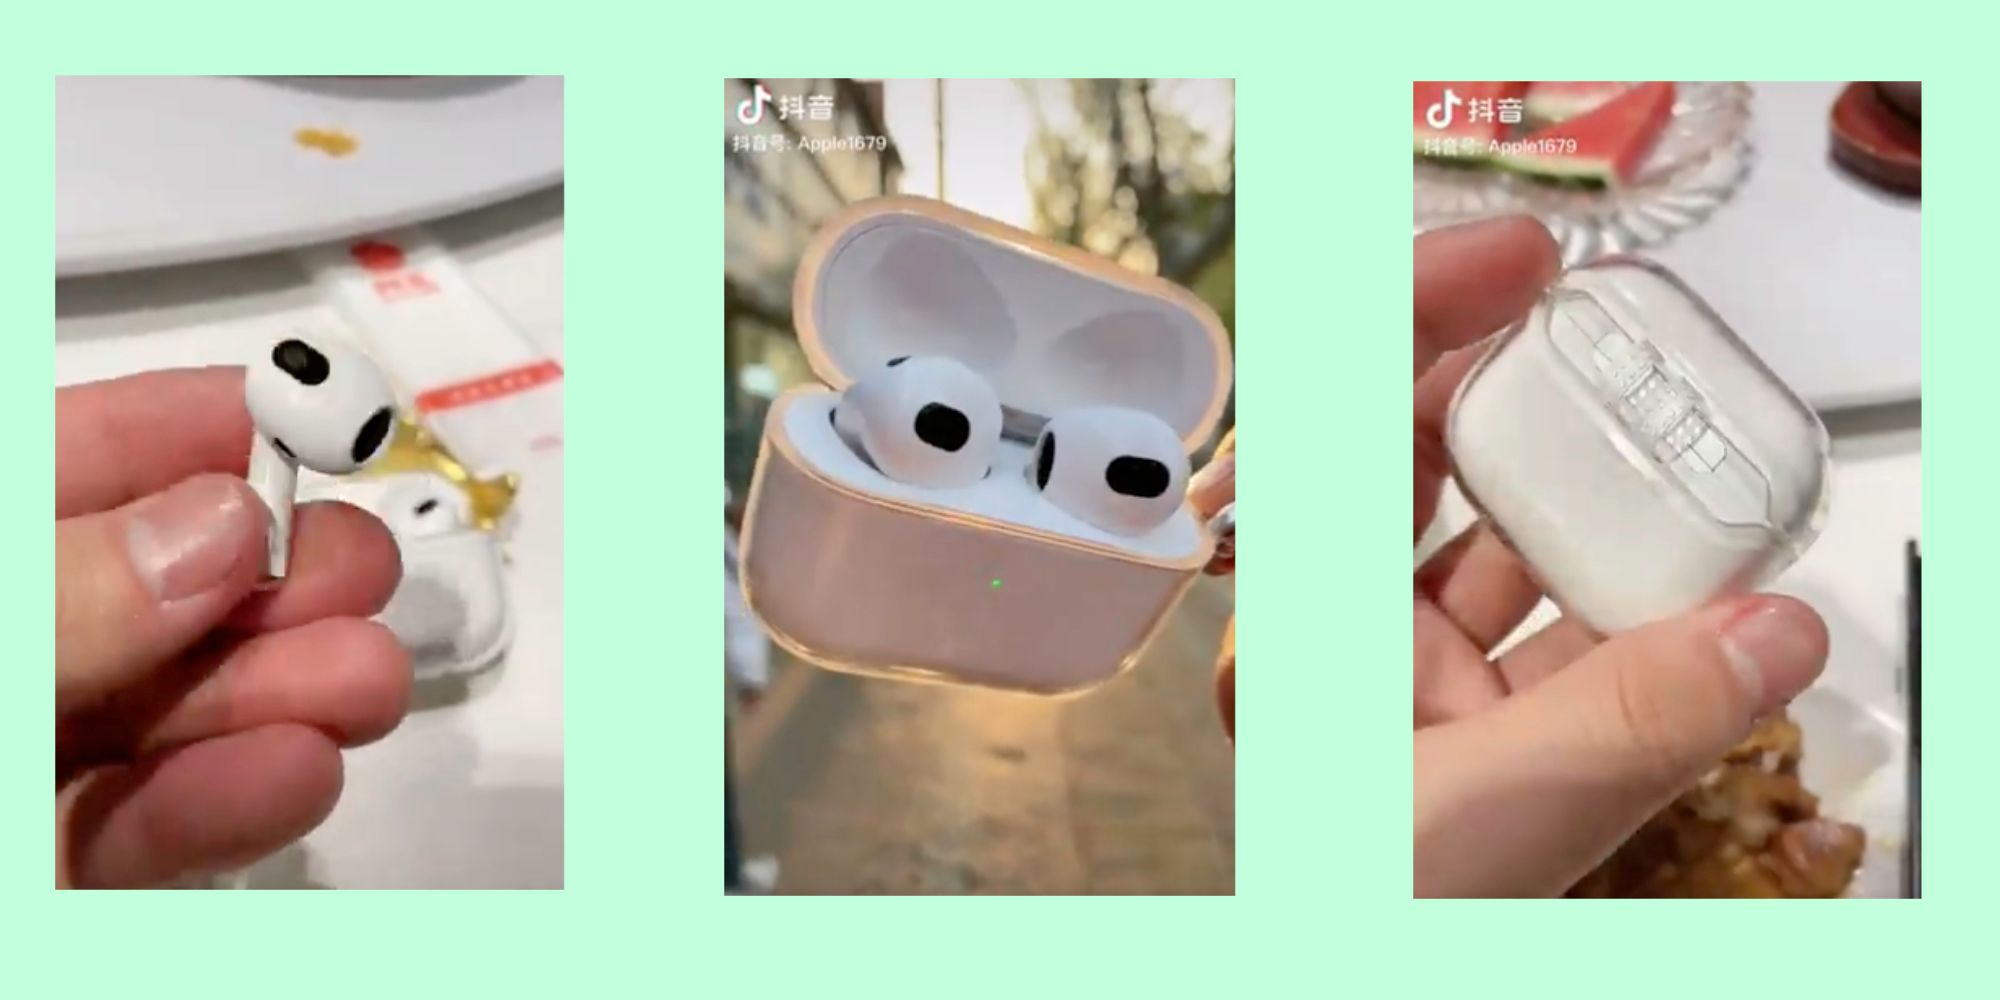 Counterfeit AirPods 3